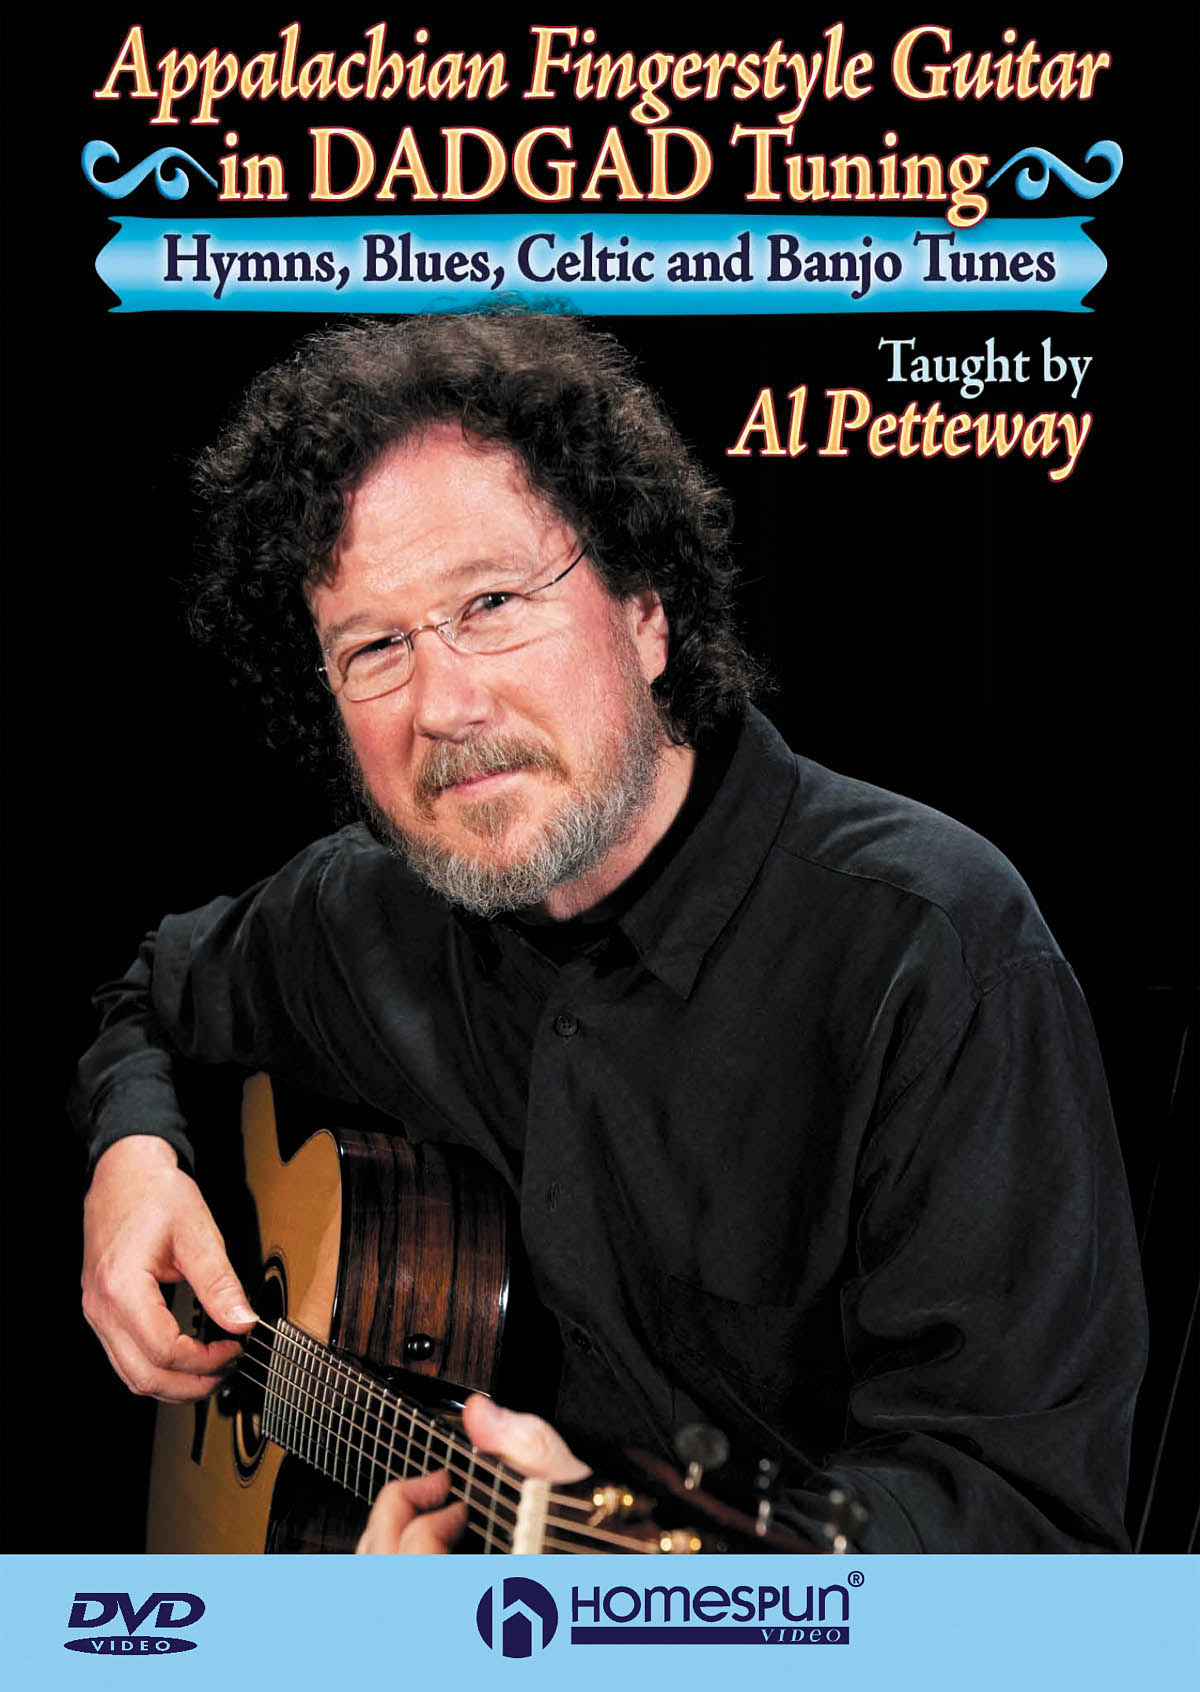 Appalachian Fingerstyle Guitar in DADGAD Tuning - DVD One: Hymns, Blues, Celtic and Banjo Tunes